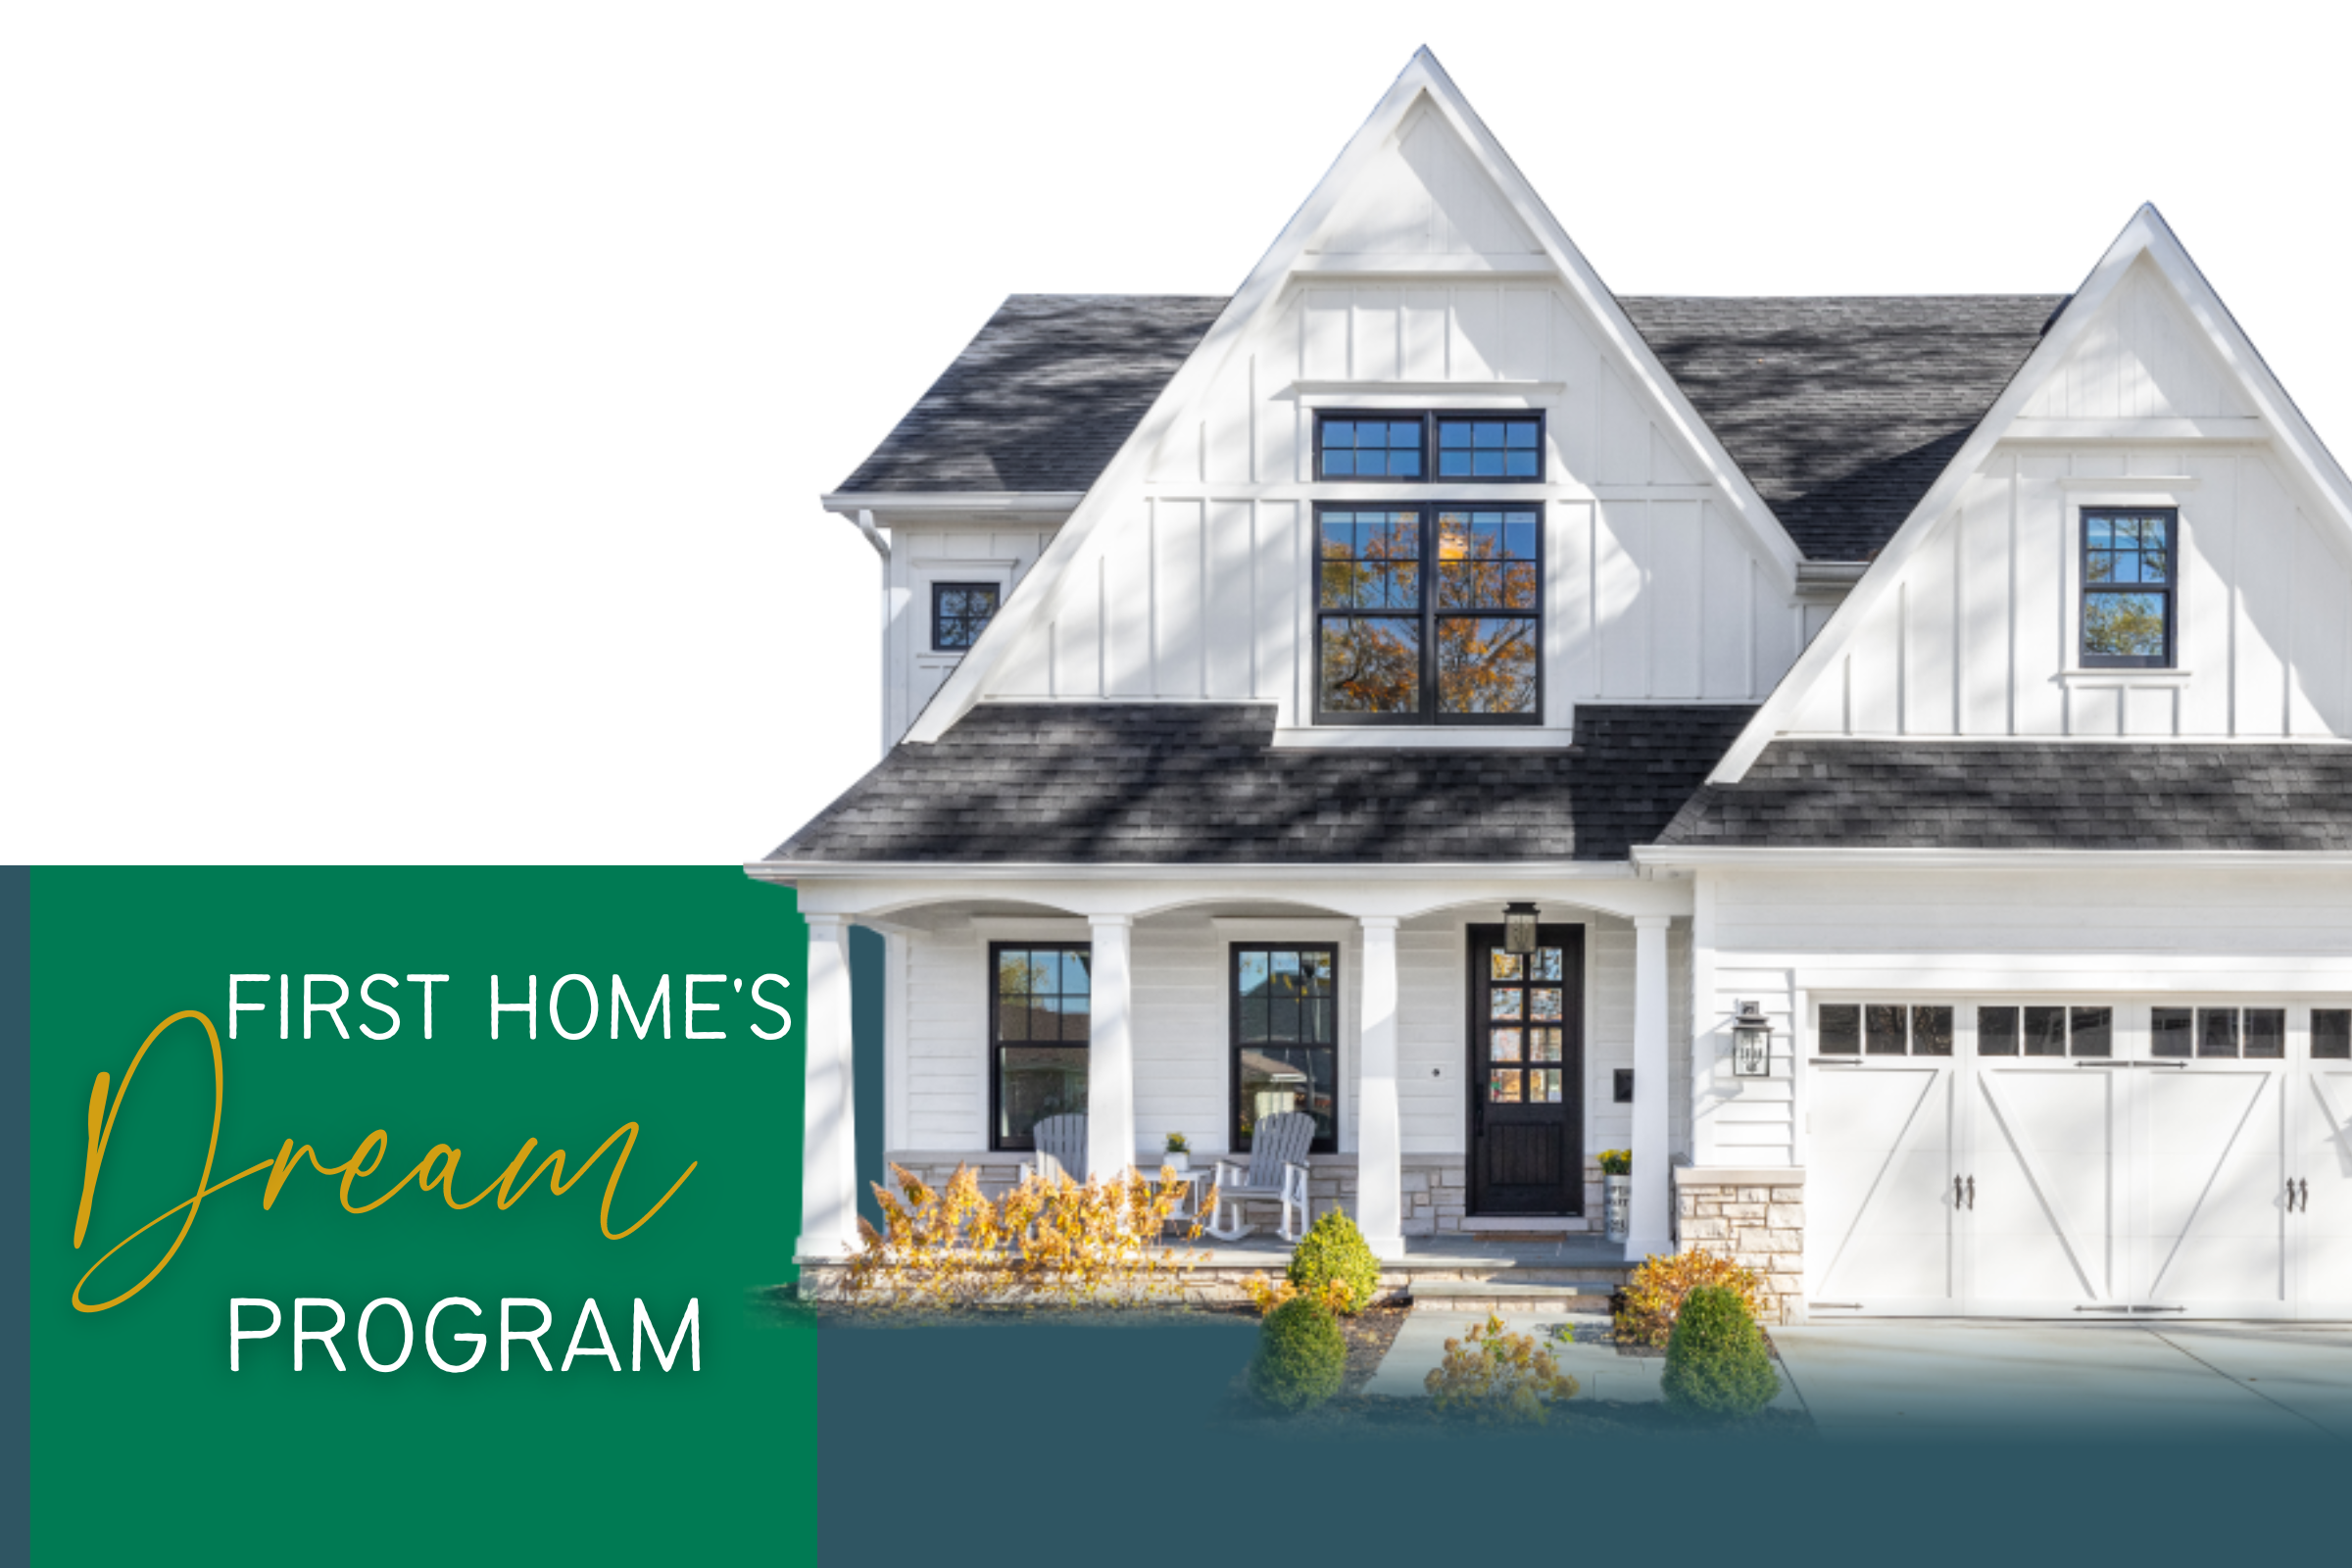 Introducing First Home’s Dream Program!